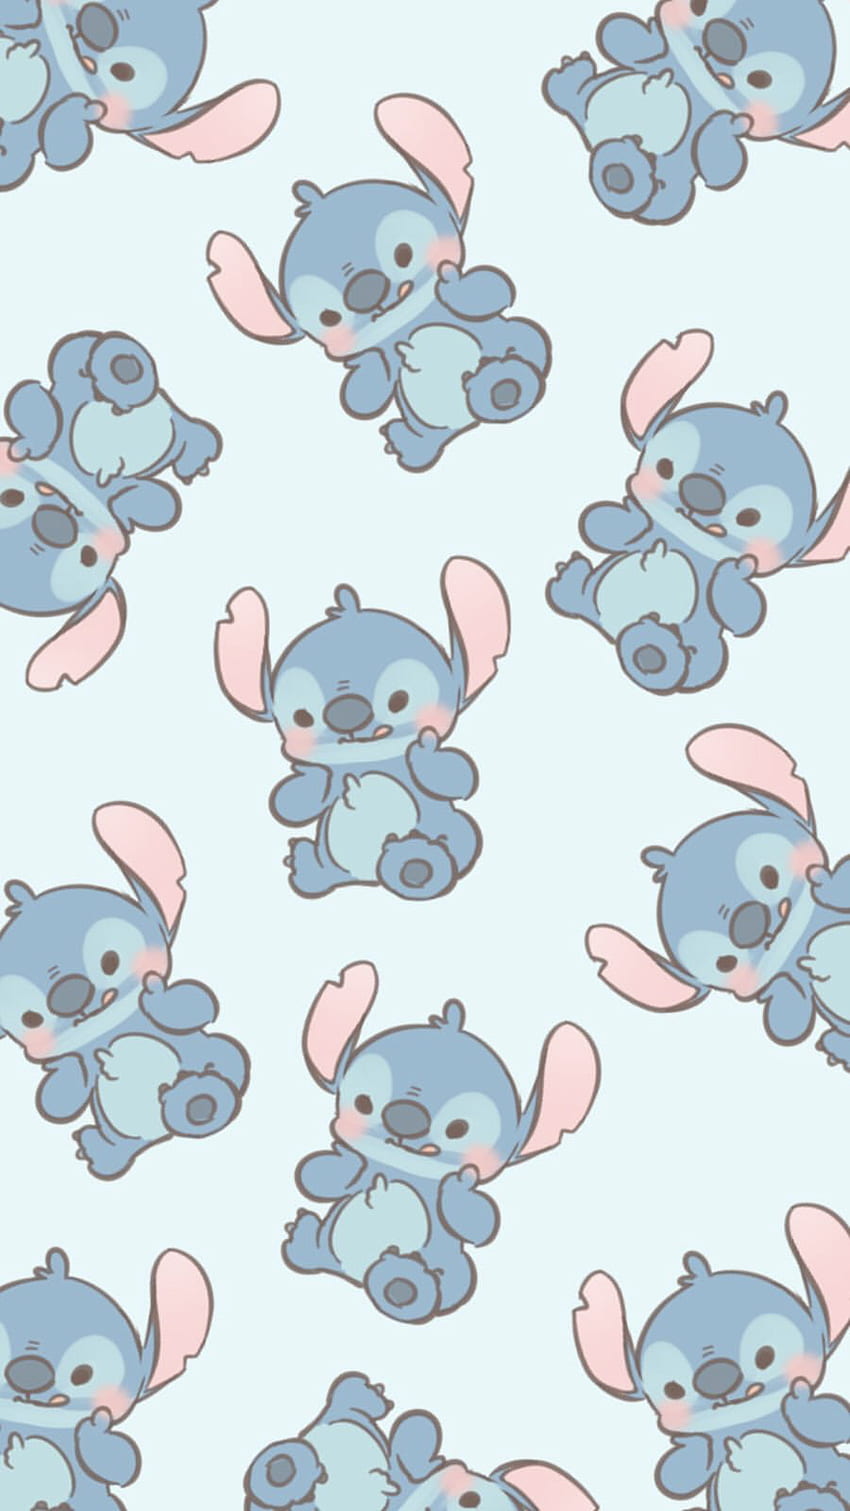 1366x768px, 720P Free download | Aesthetic Cute Kawaii Stitch TV Page 1 ...